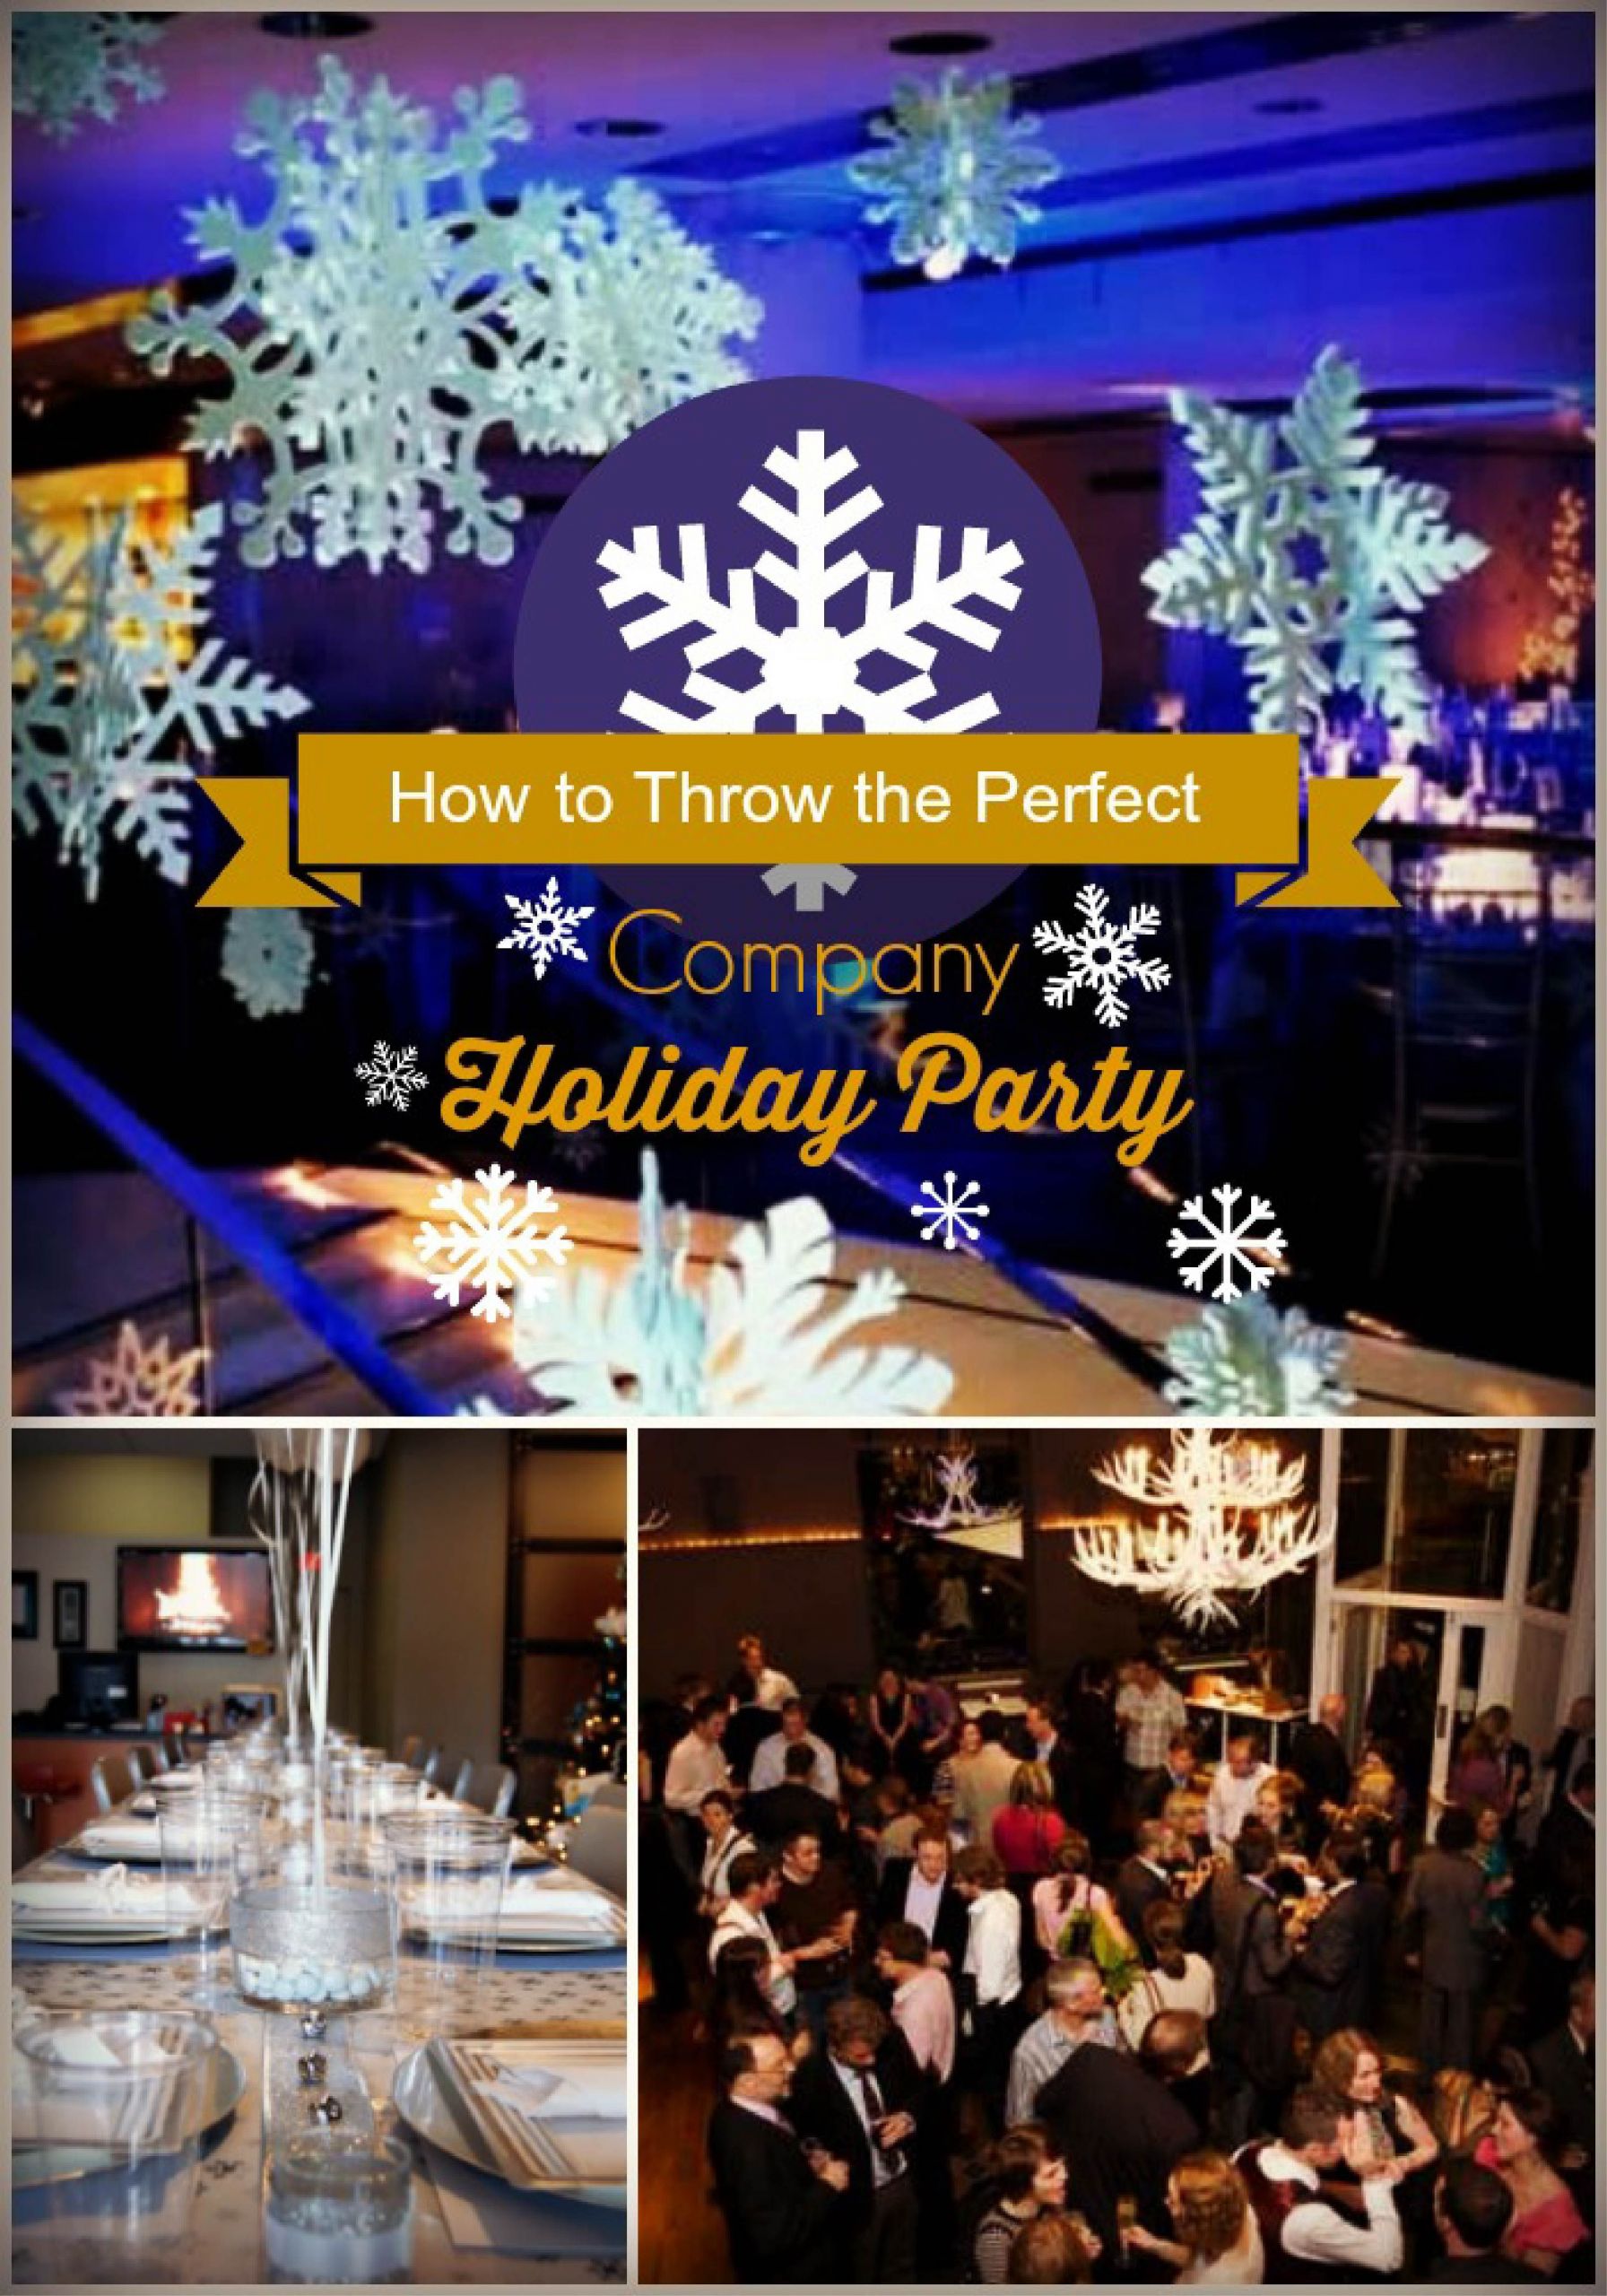 Office Holiday Party Entertainment Ideas
 How to Throw the Perfect pany Holiday Party